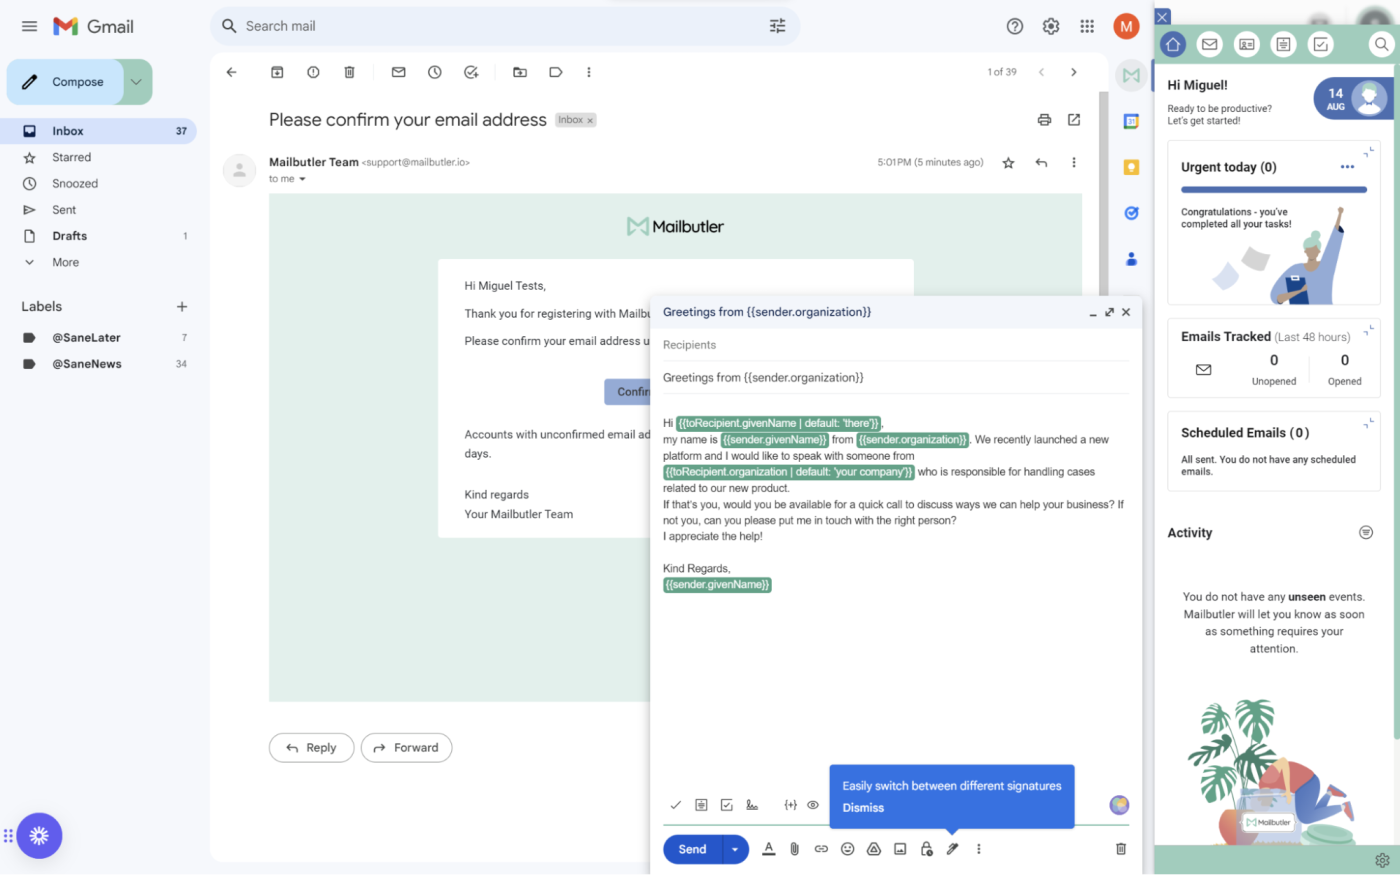 Mailbutler, our pick for the best AI email assistant for gathering contact details and tasks